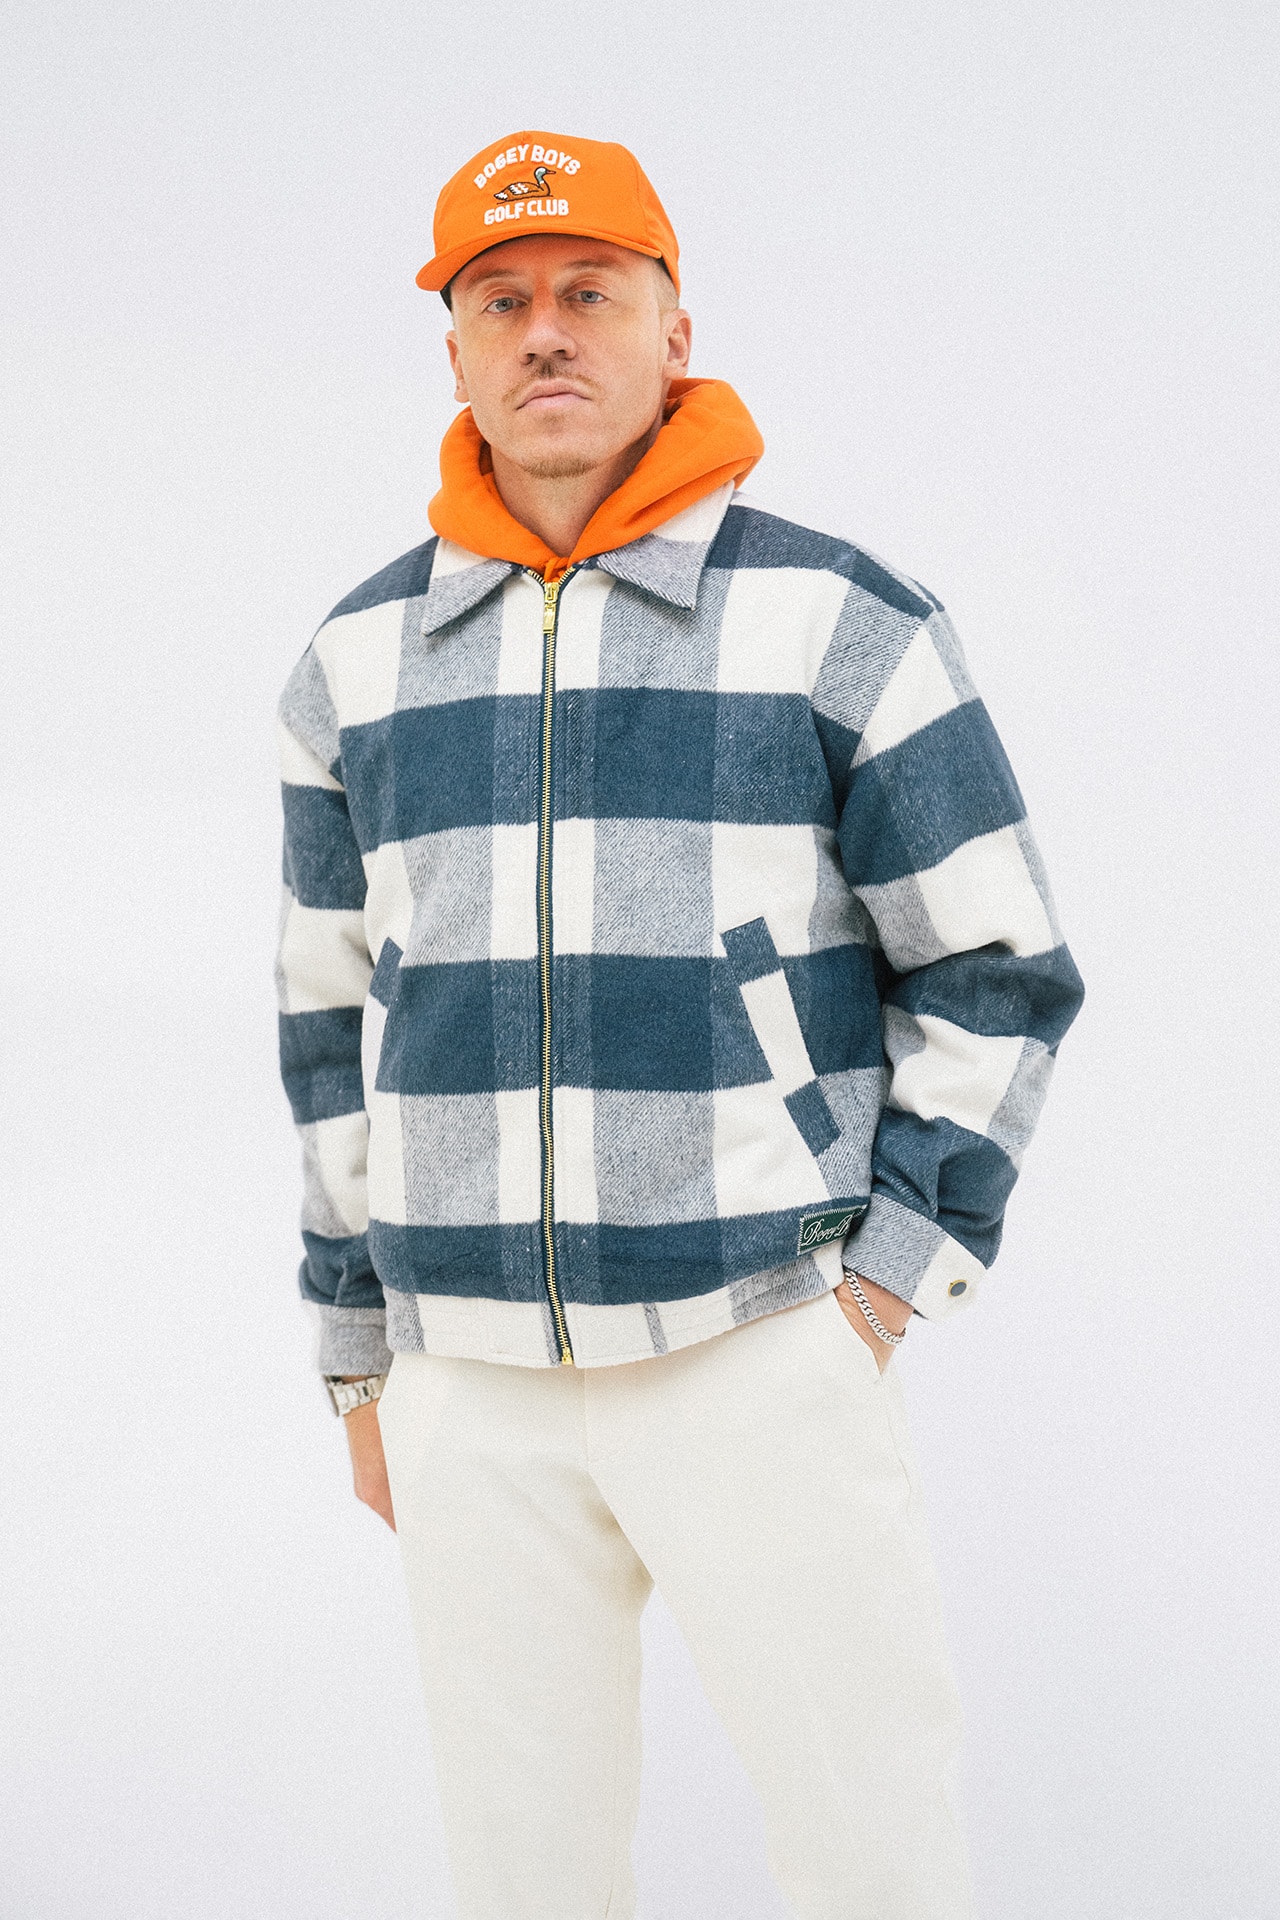 bogey boys golf duck collection lookbook shirt hoodie polo checkered jacket